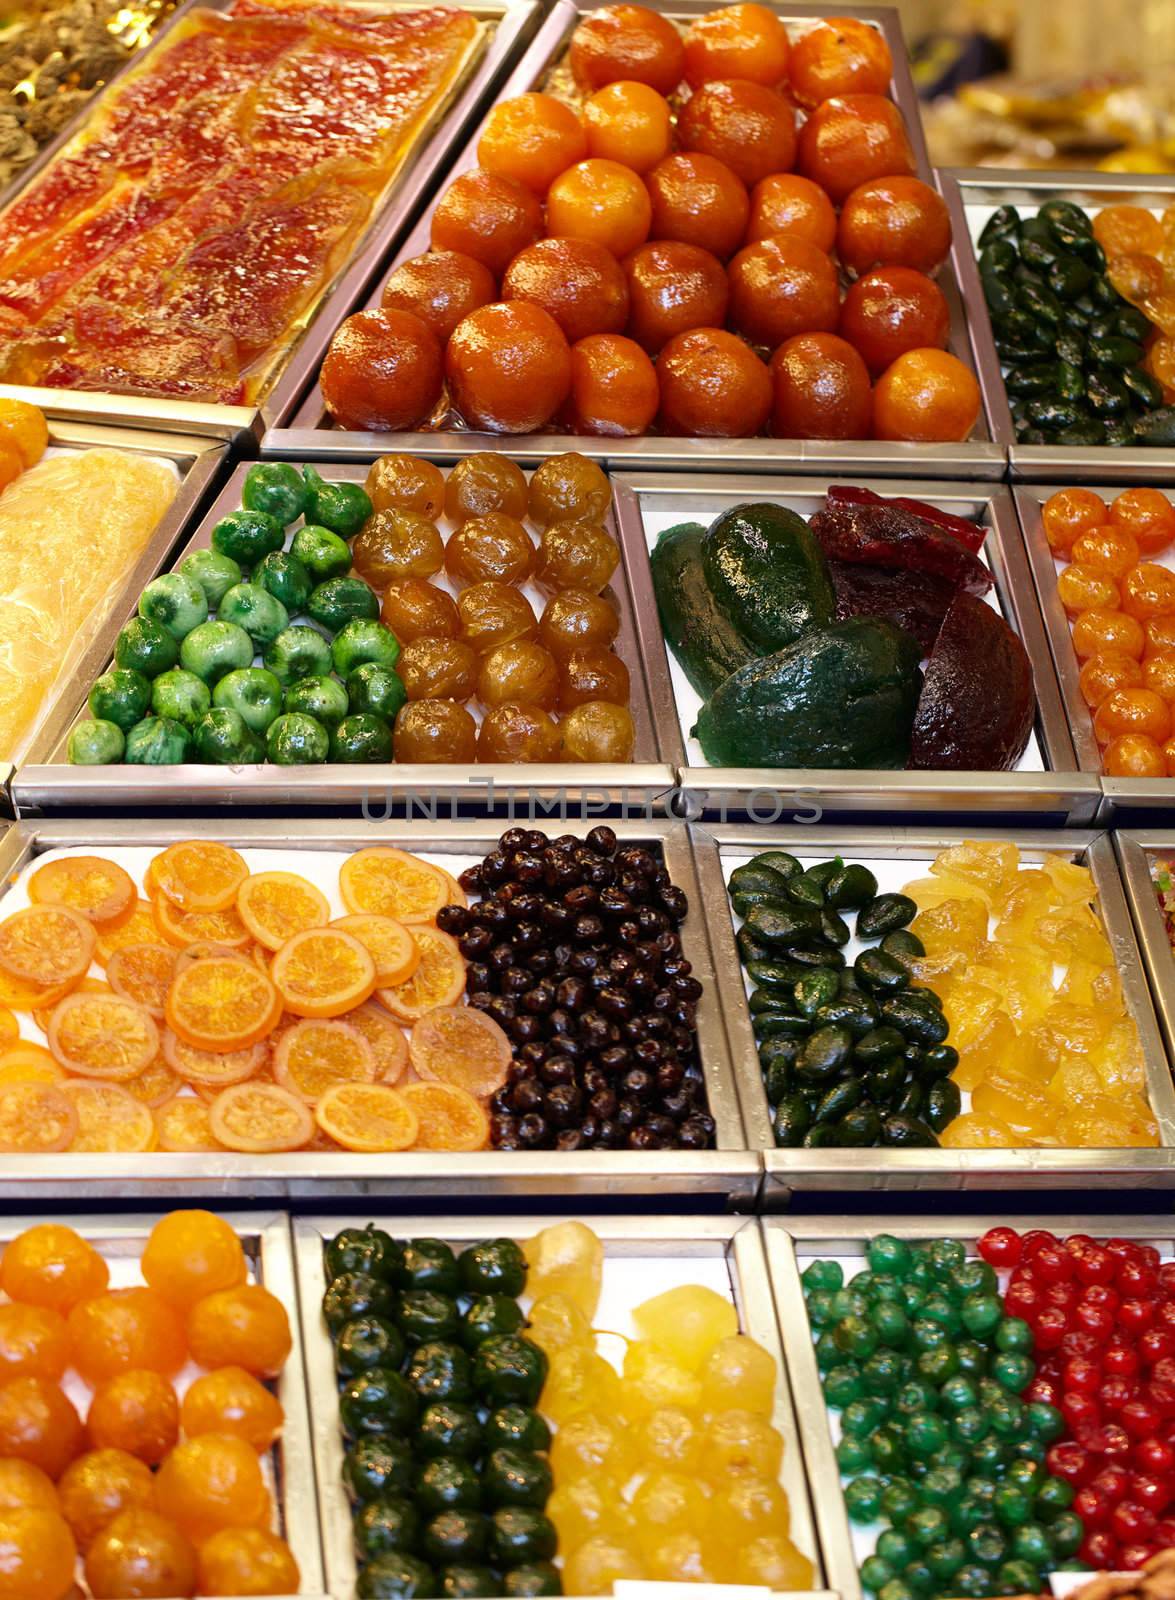 Assorted candy in a market, Barcelona, Spain.